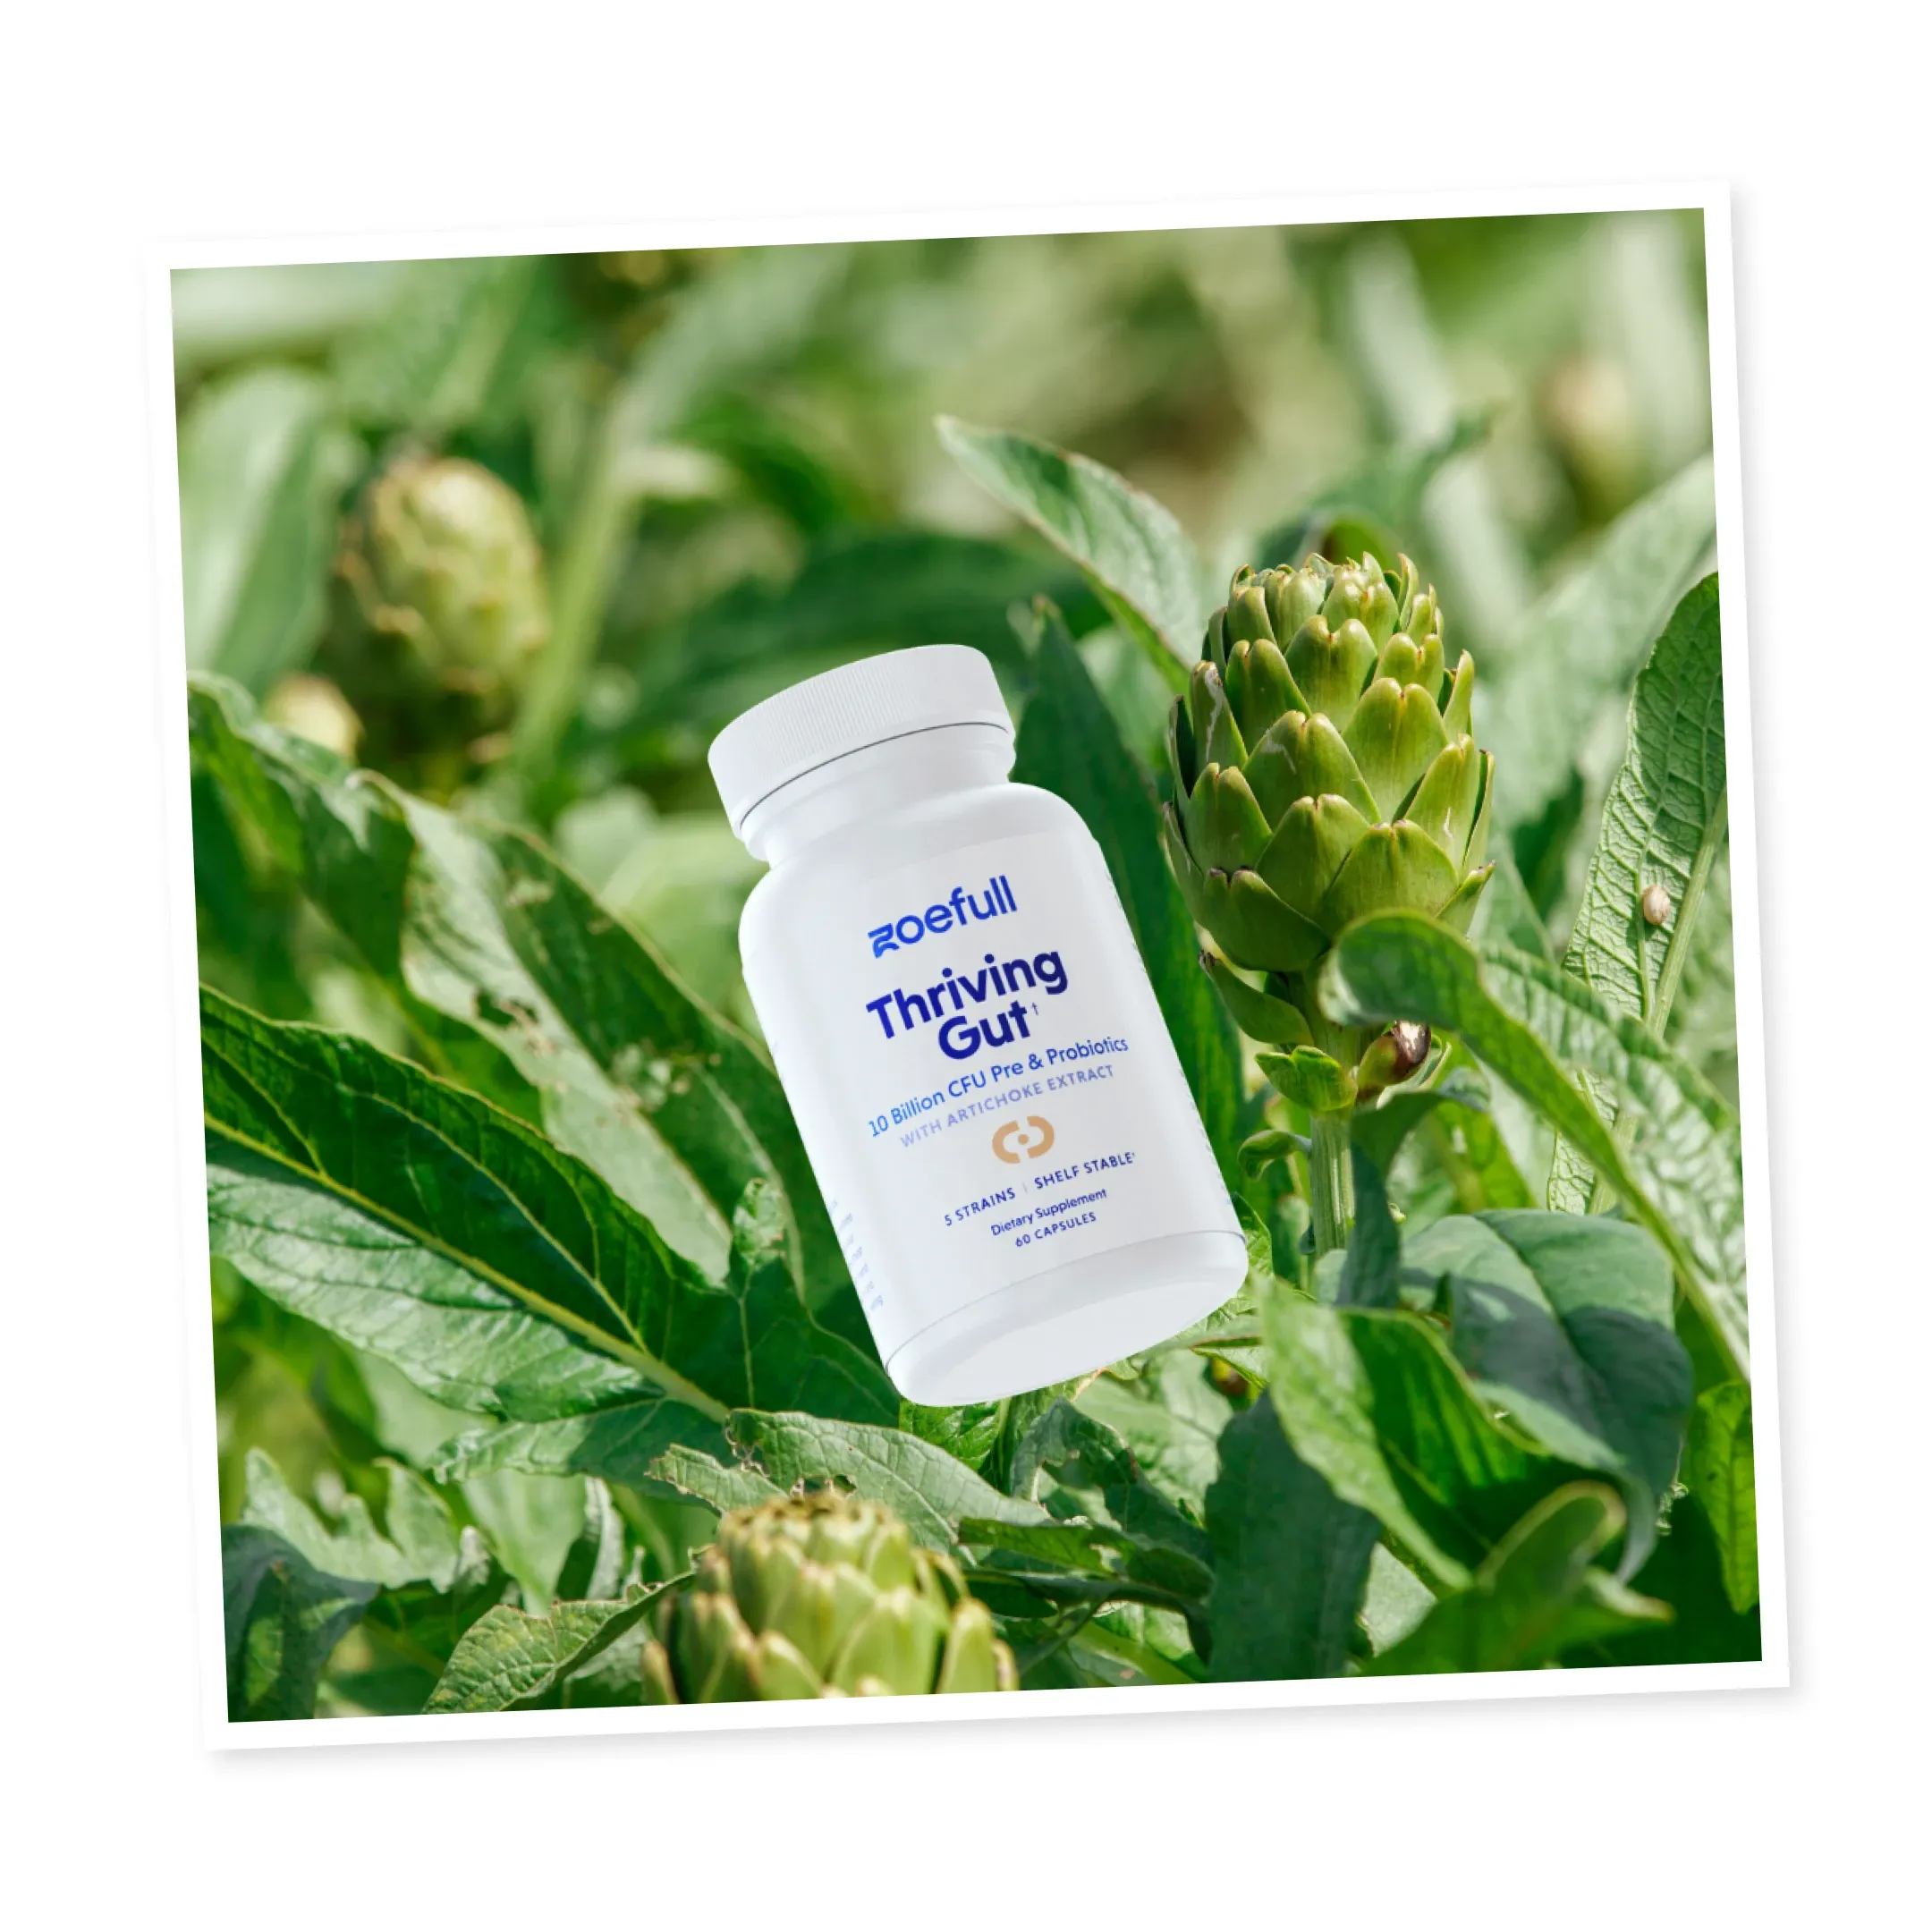 Design that showcases zoefull's thriving gut supplement in front of a field of artichokes.